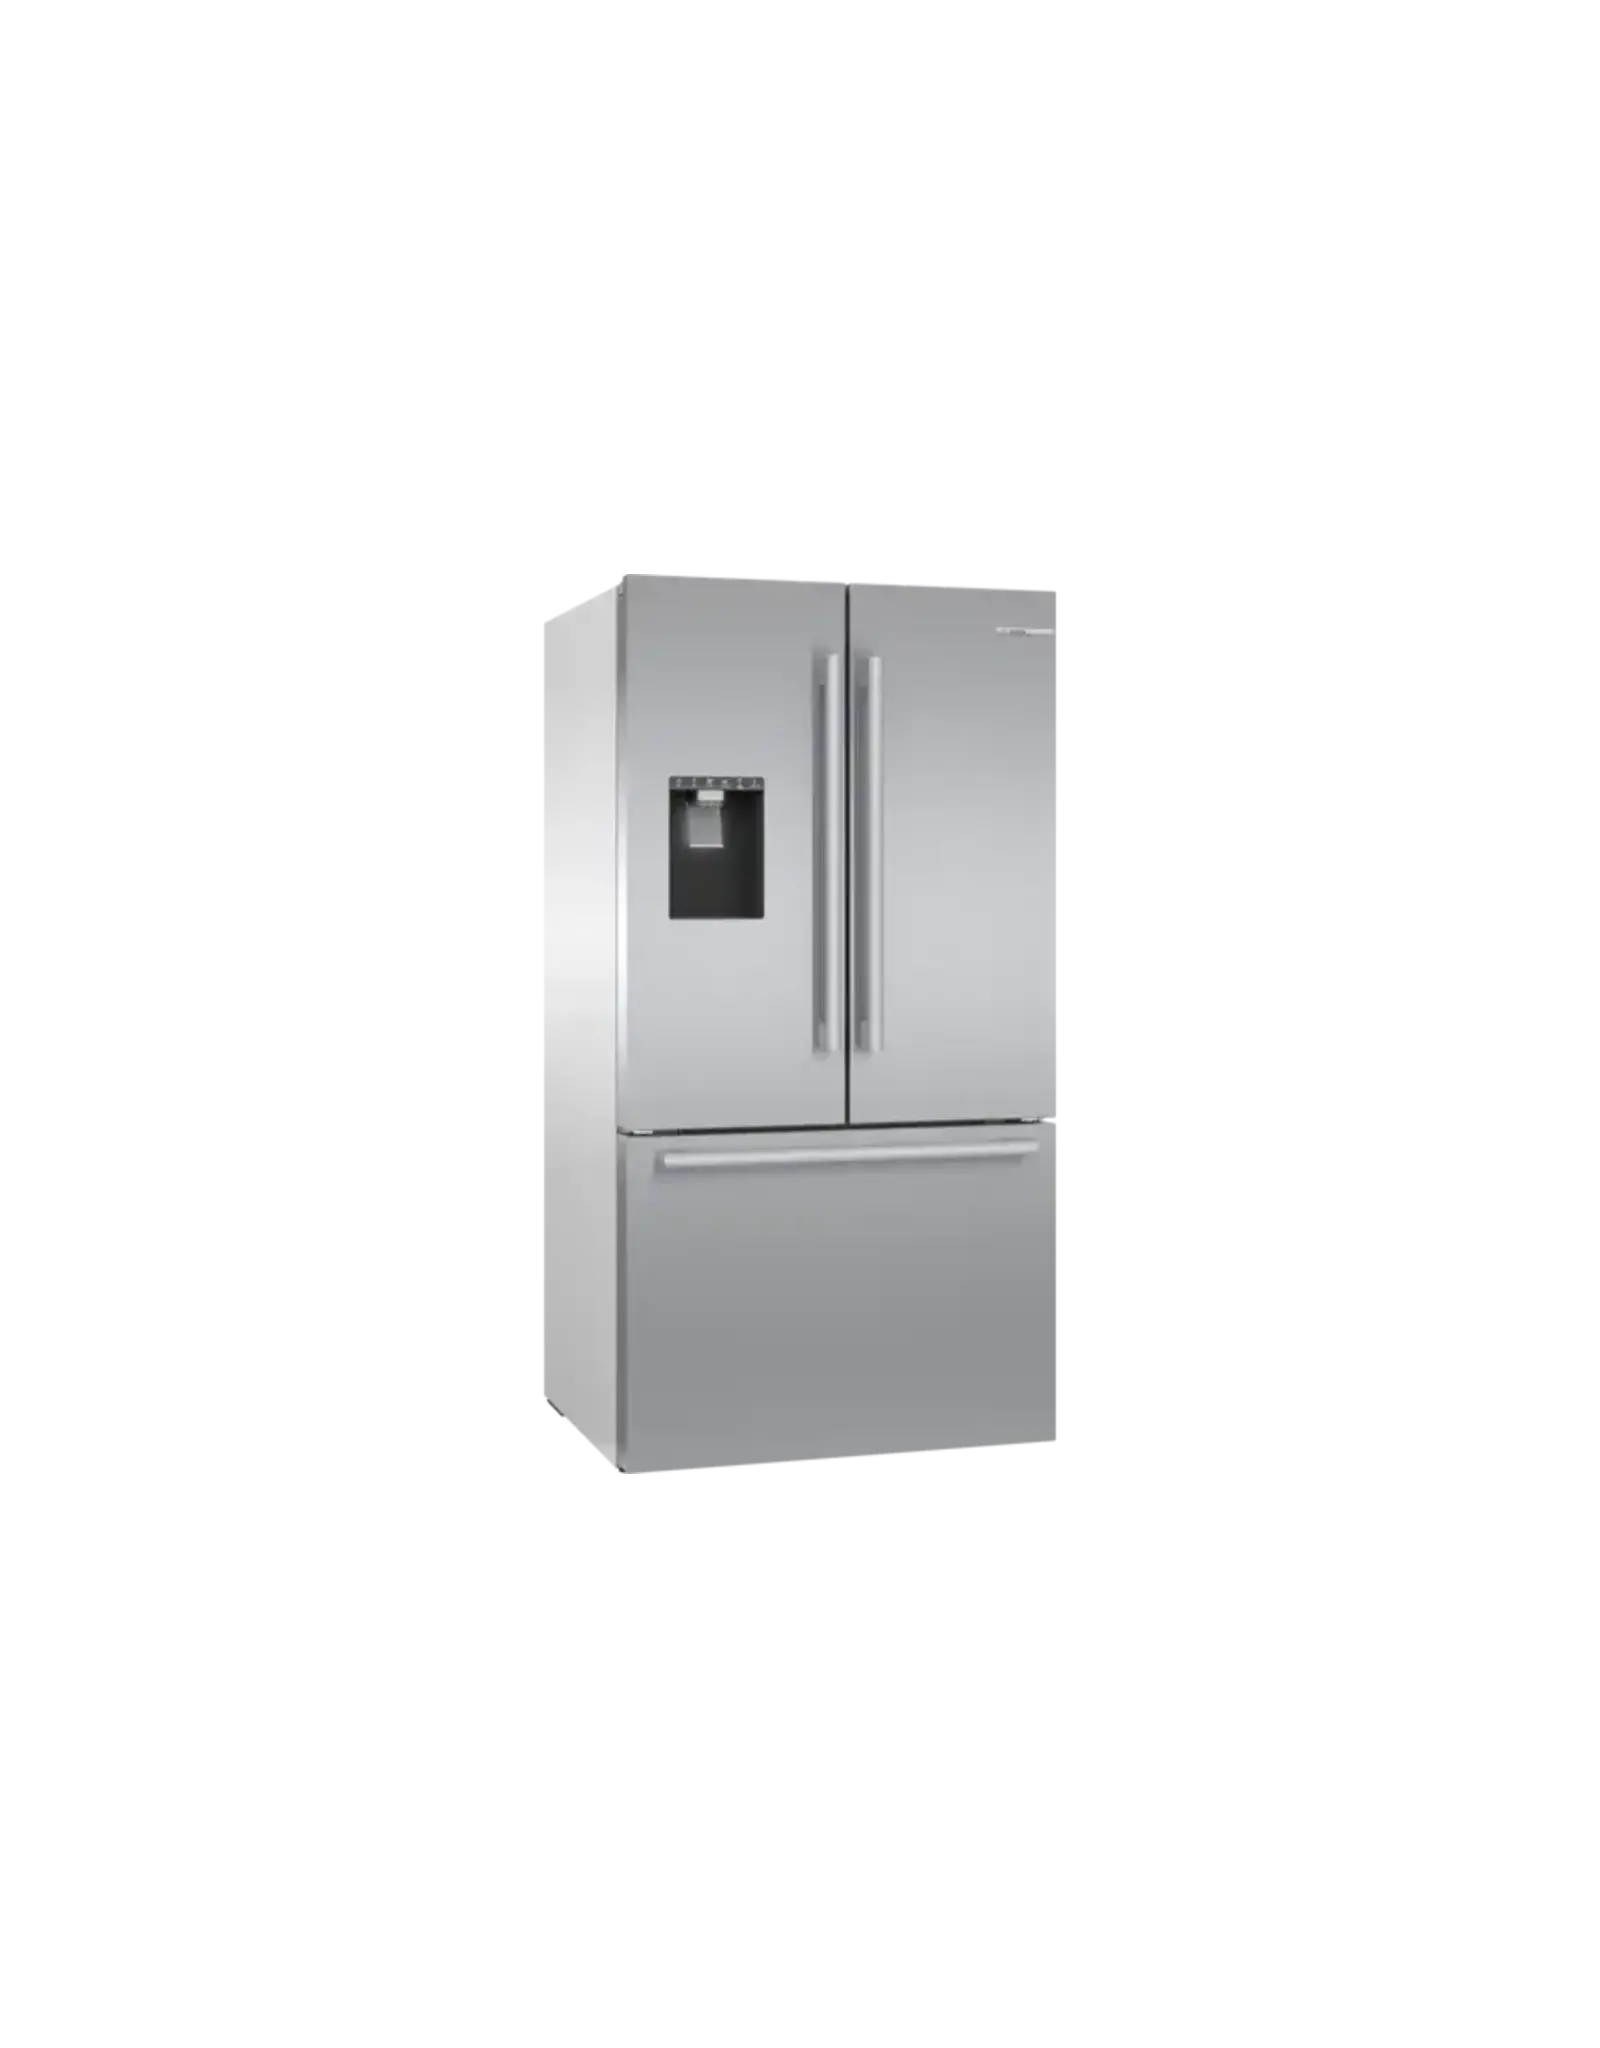 BOSCH Bosch 500 Series 26-cu ft Smart French Door Refrigerator with Ice Maker (Stainless Steel) ENERGY STAR